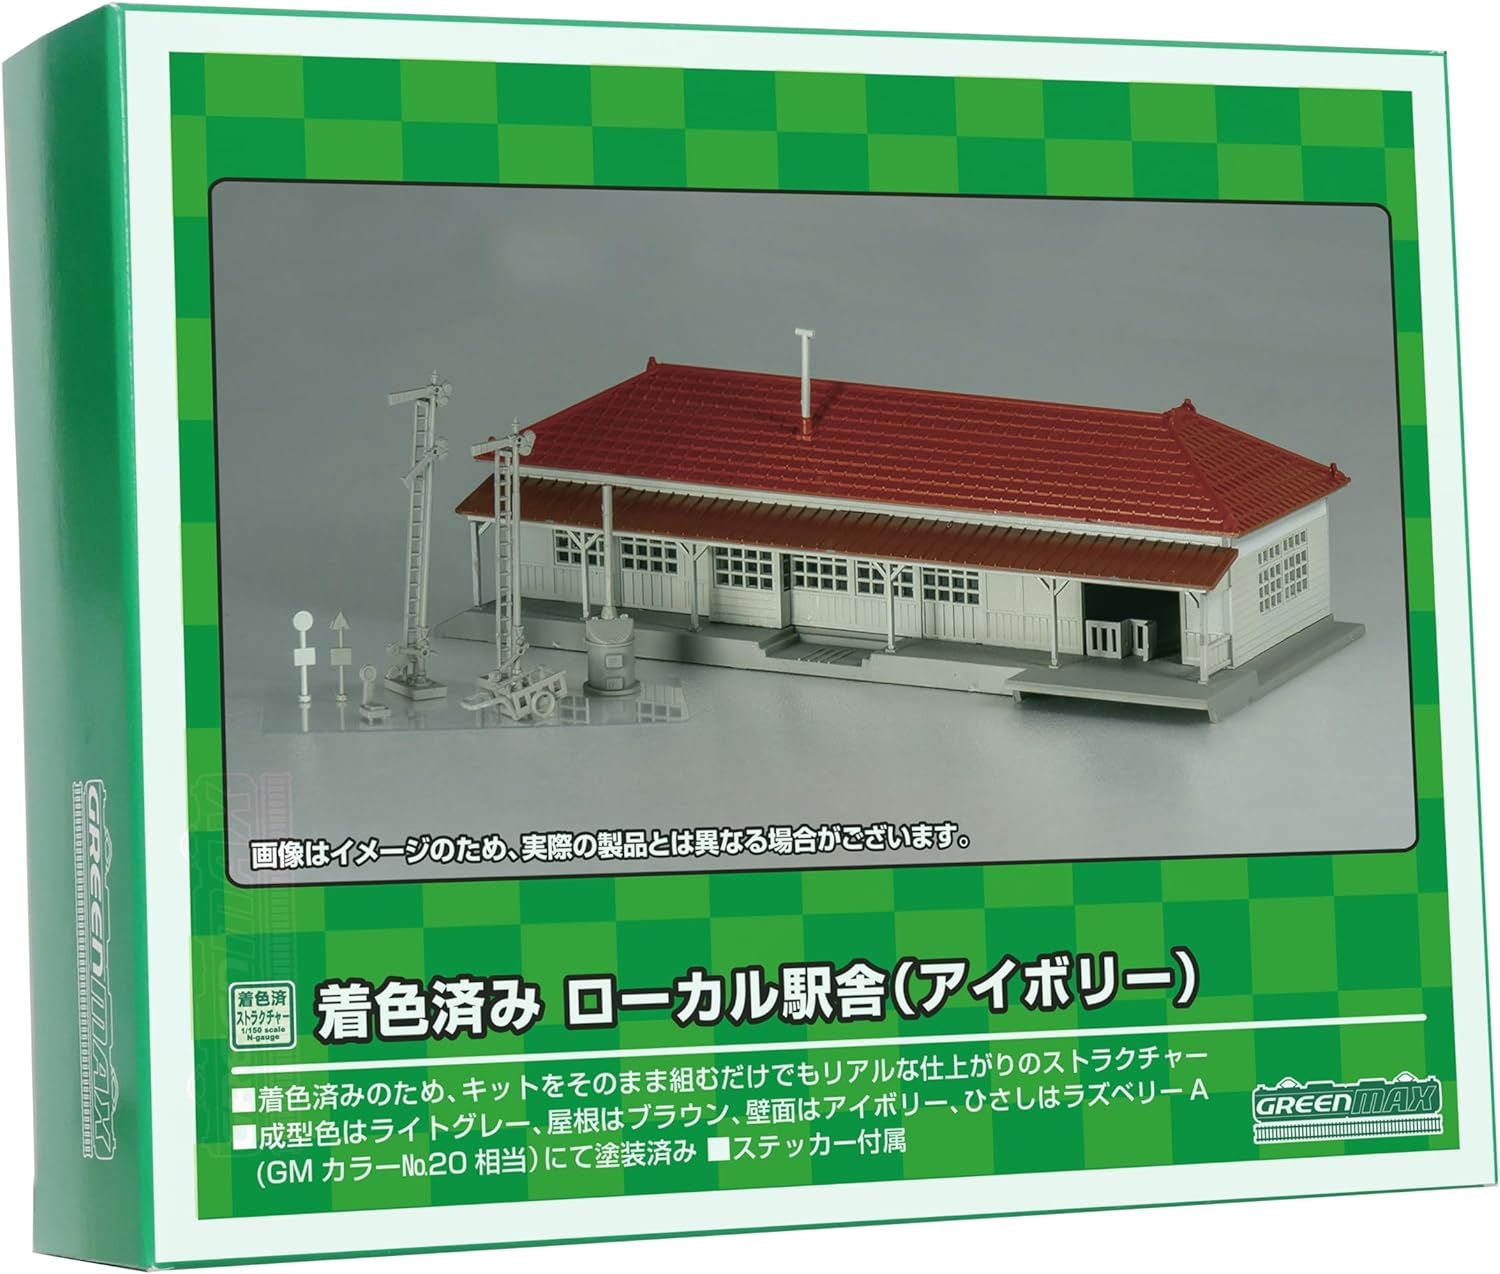 Greenmax 2902 N Gauge Colored Local Station Building (Ivory) Model Railway Structure - BanzaiHobby